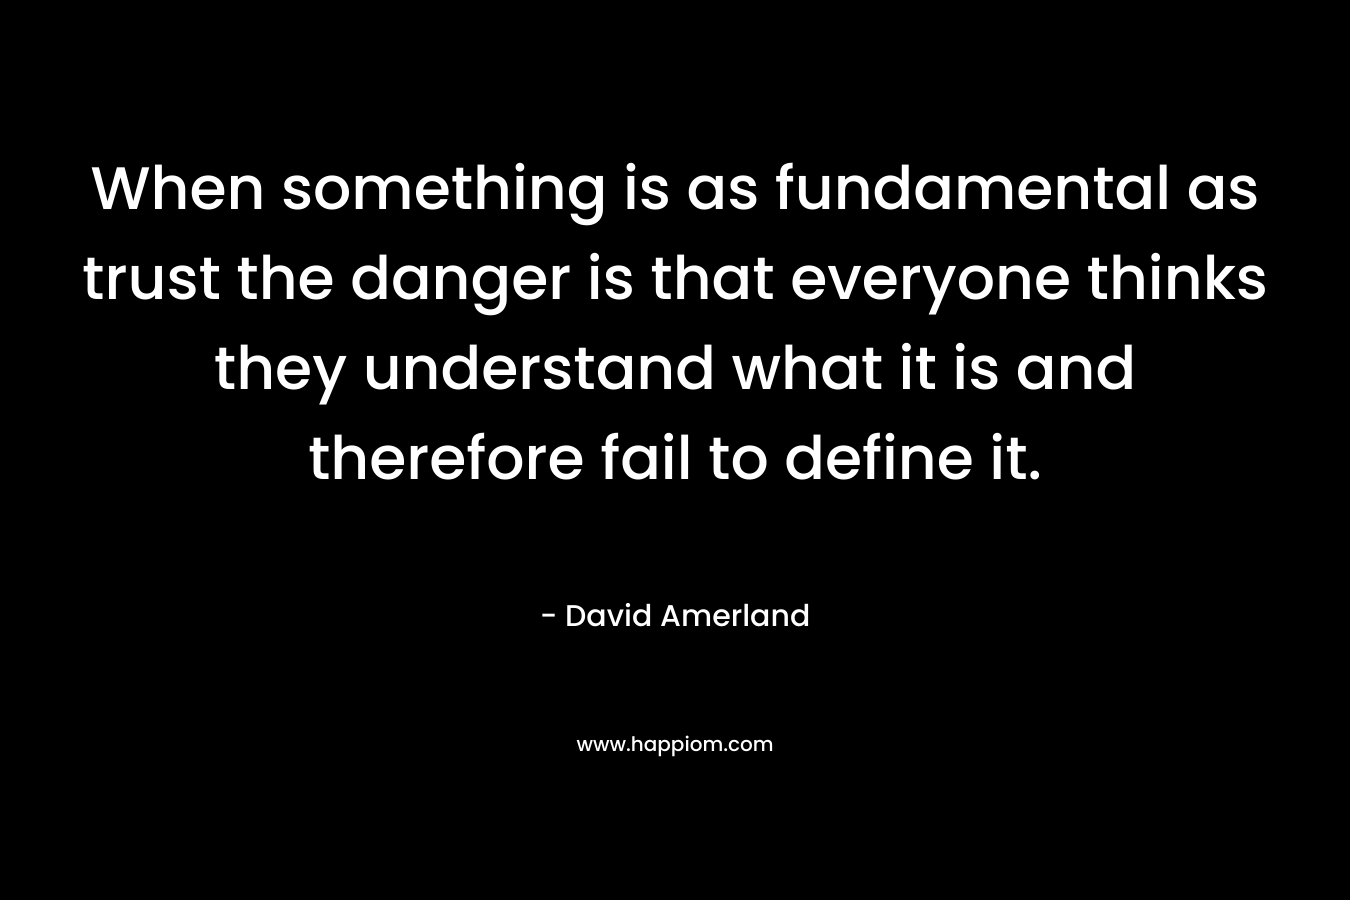 When something is as fundamental as trust the danger is that everyone thinks they understand what it is and therefore fail to define it.